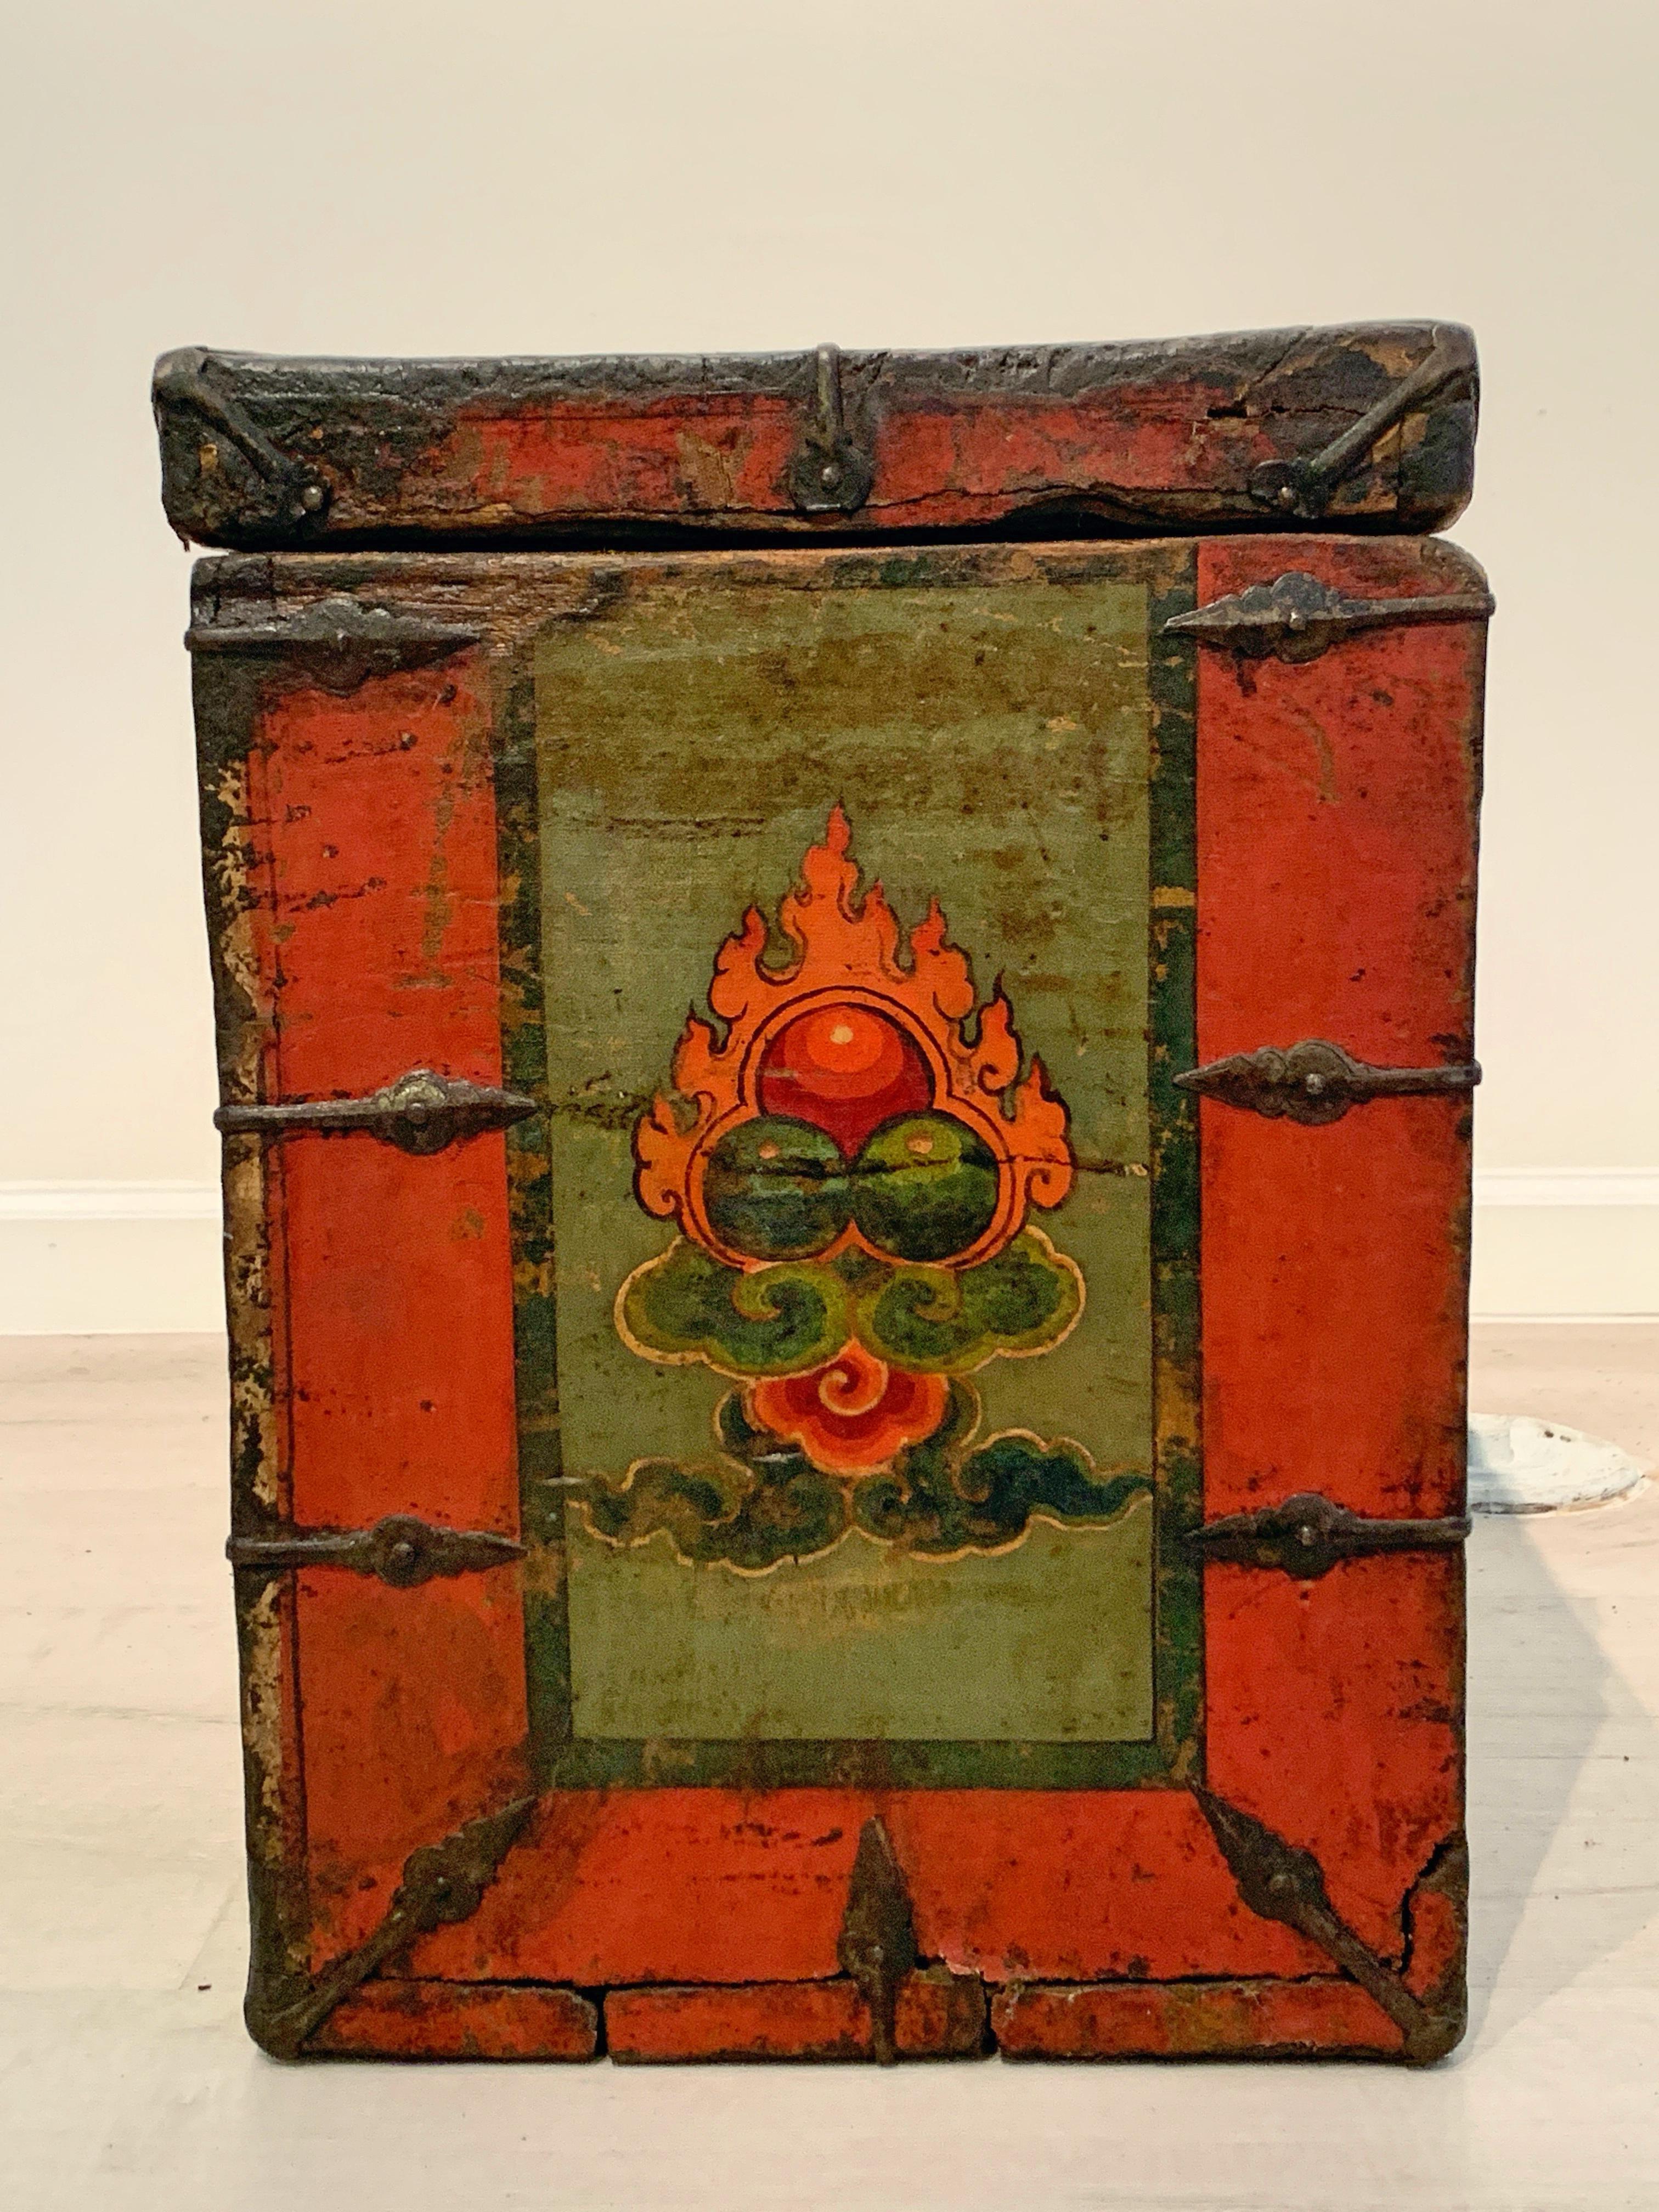 Tibetan Painted Trunk with Dragon and Brocade Design, 17th-18th Century, Tibet 7